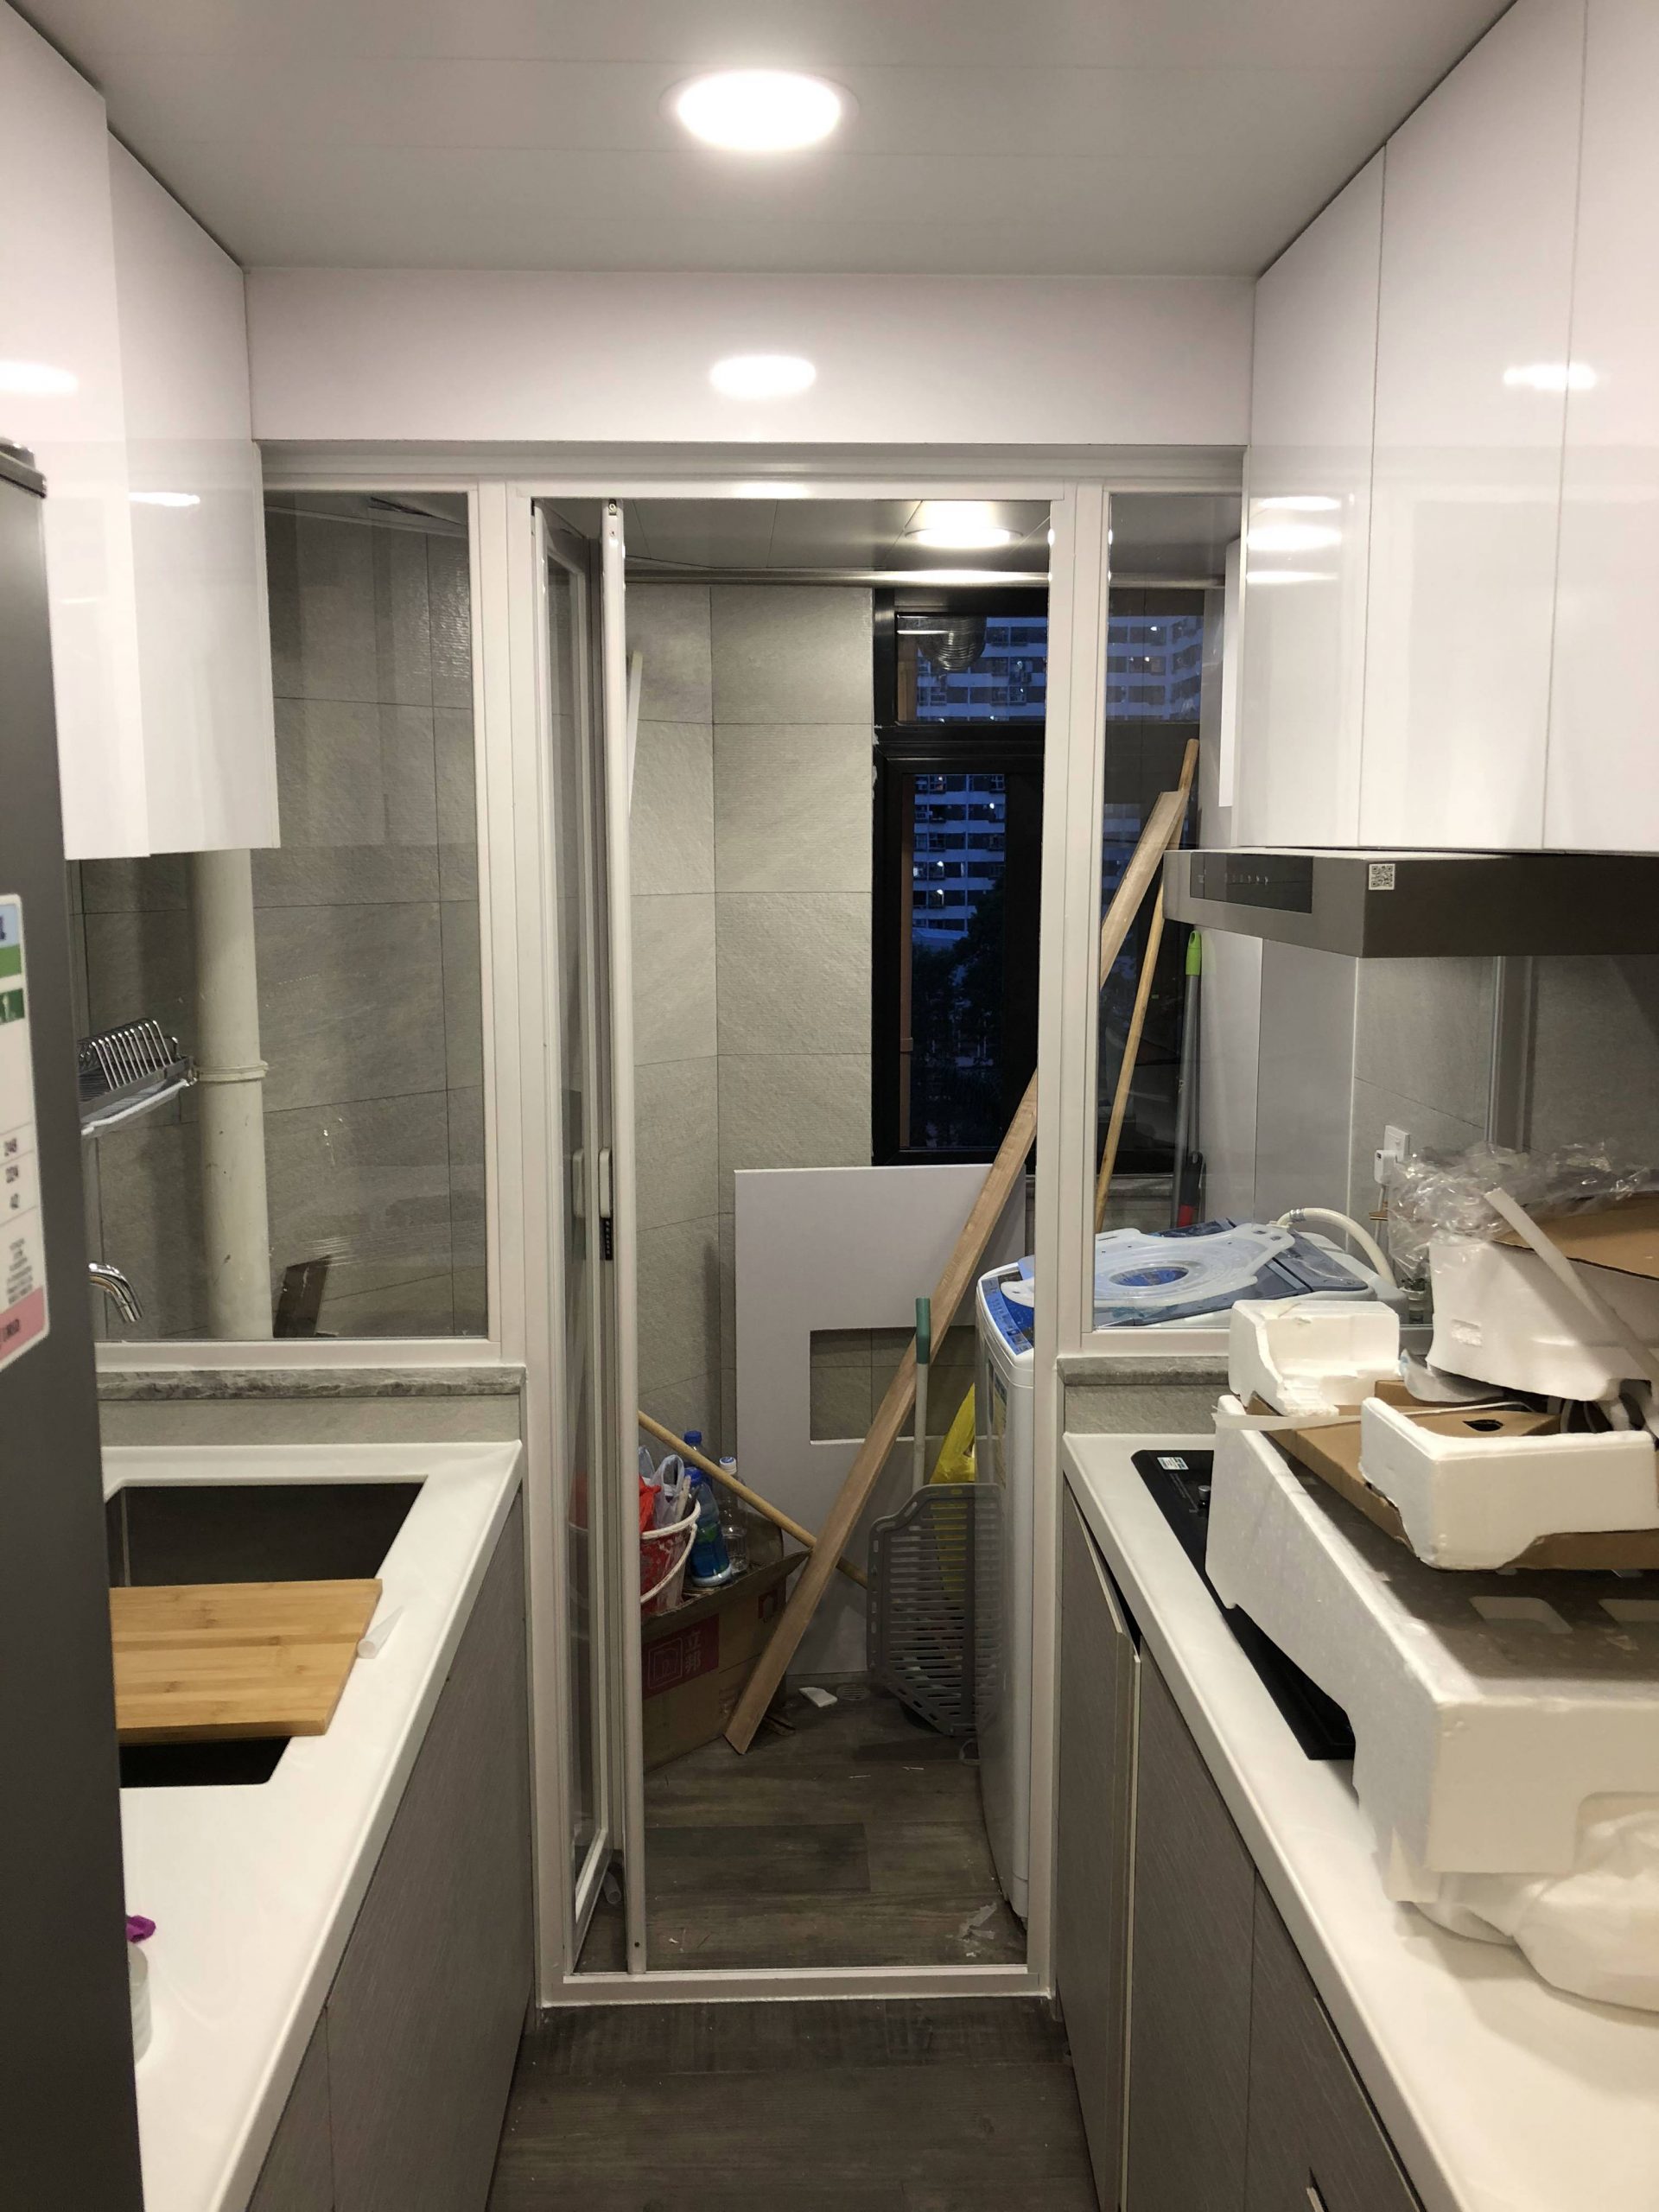 <p>Glass Partition between Cooking and Laundry Area (Opened)</p>
